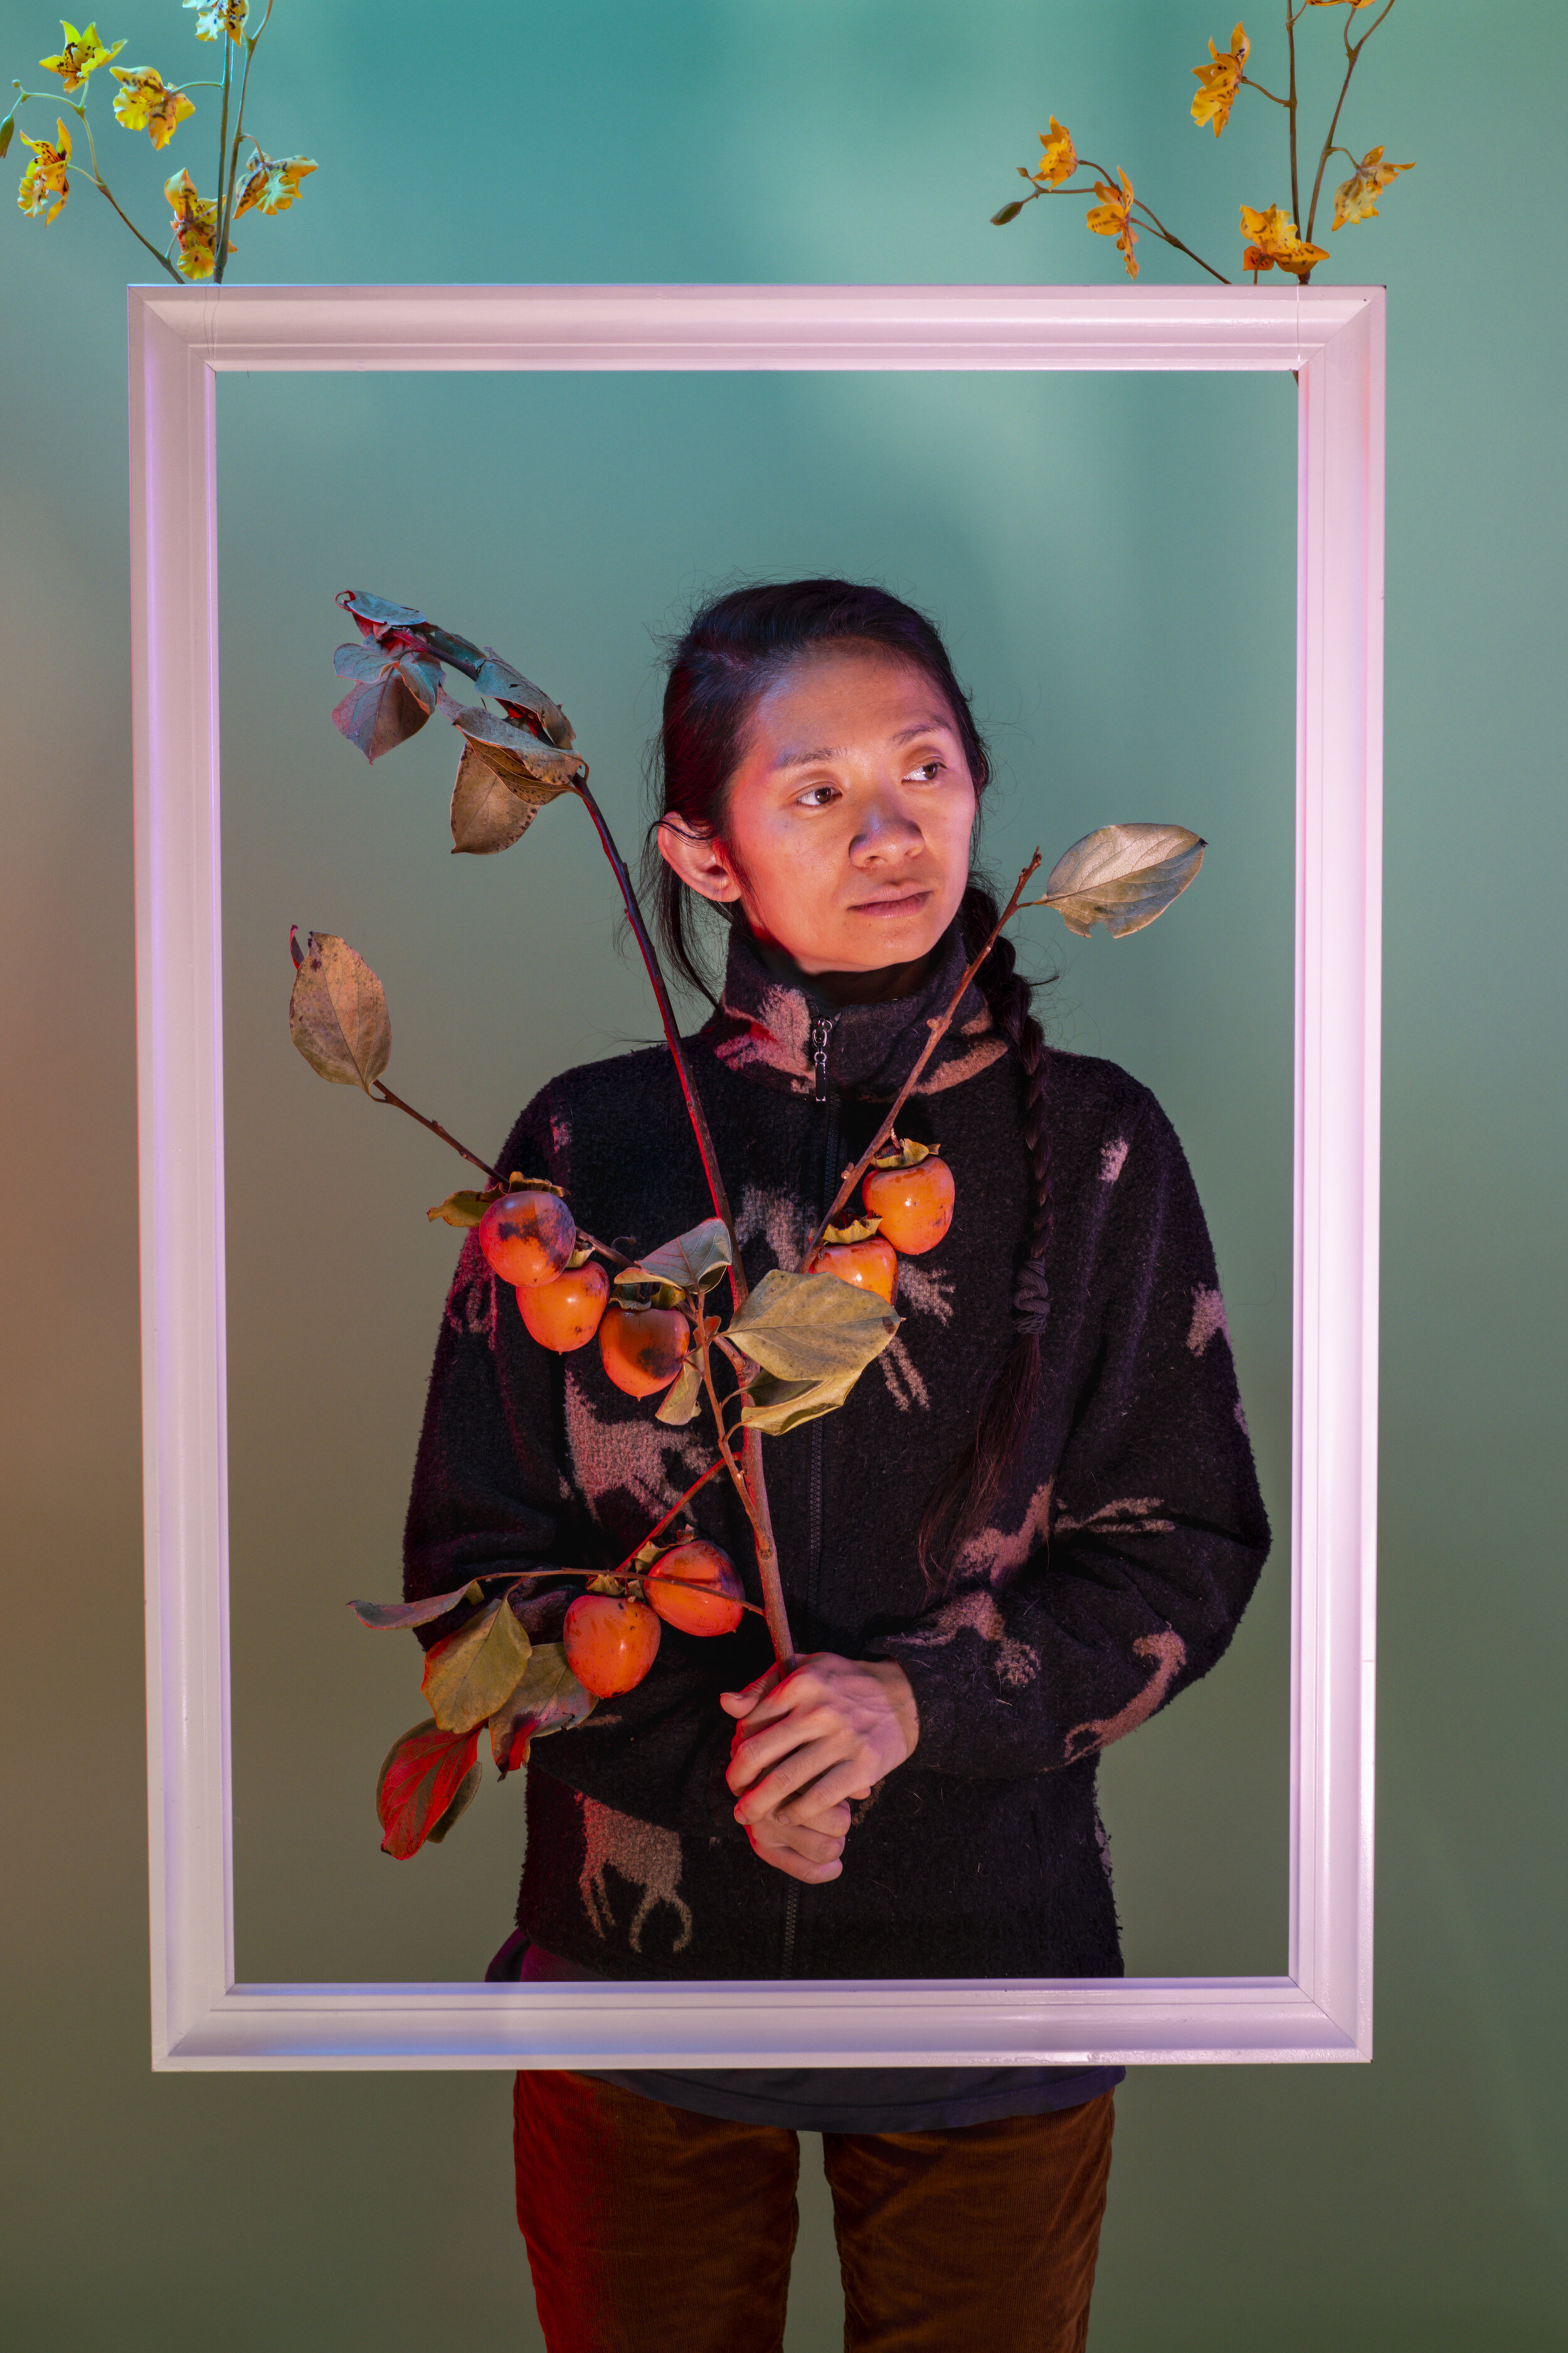  Director Chloé Zhao, holding a branch from her persimmon tree, is photographed in promotion of her film, “Nomadland,” in the backyard of her home, outside Los Angeles, CA, Friday, Nov. 13, 2020. Zhao’s second movie, Marvel’s “The Eternals,” was also